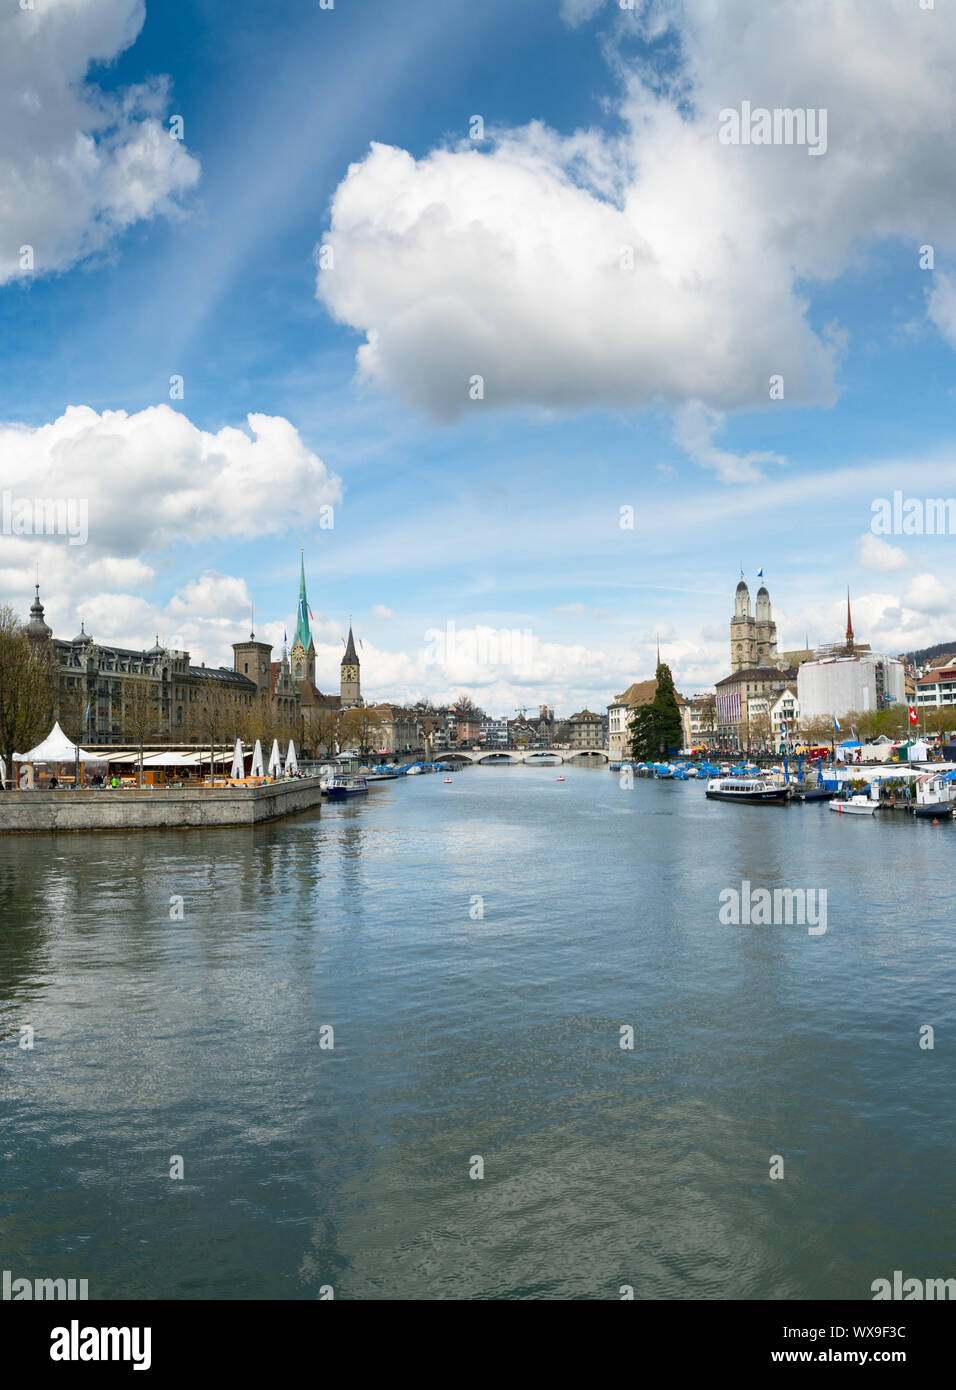 Zurich, ZH / Switzerland - April 8, 2019: Zurich cityscape with the river Limmat during the traditio Stock Photo